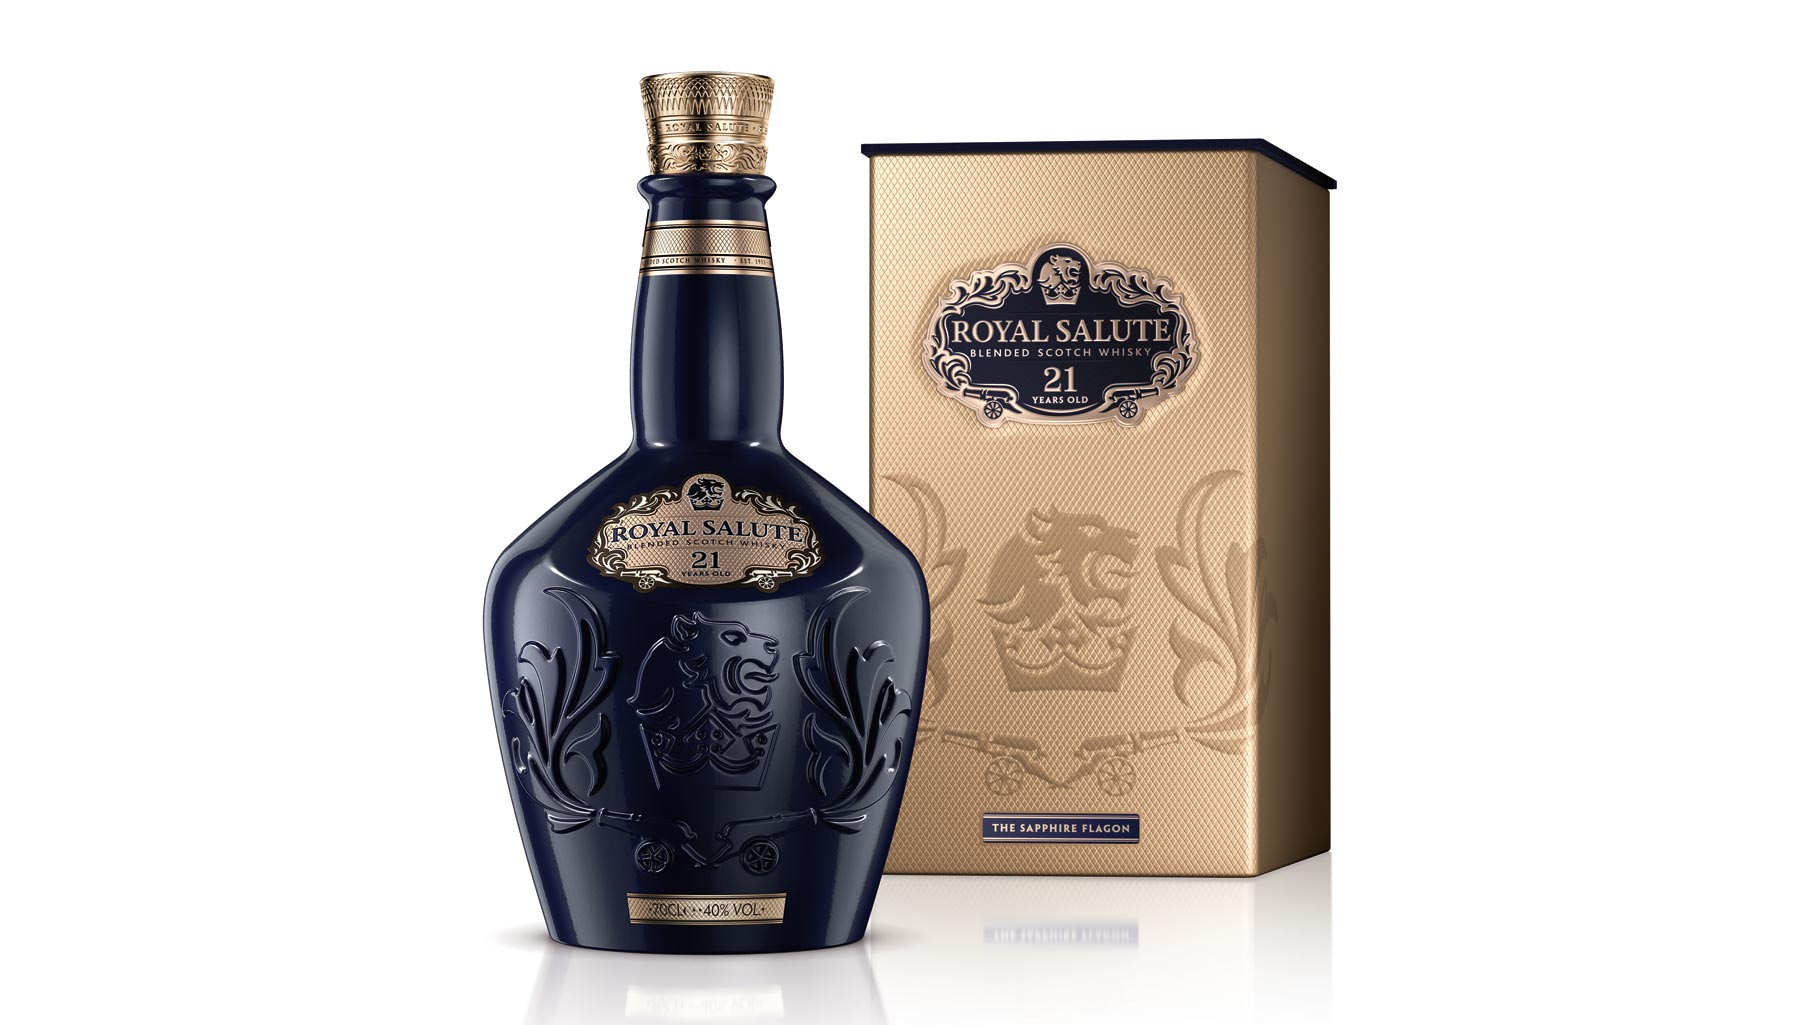 royal salute 21 years price hyderabad